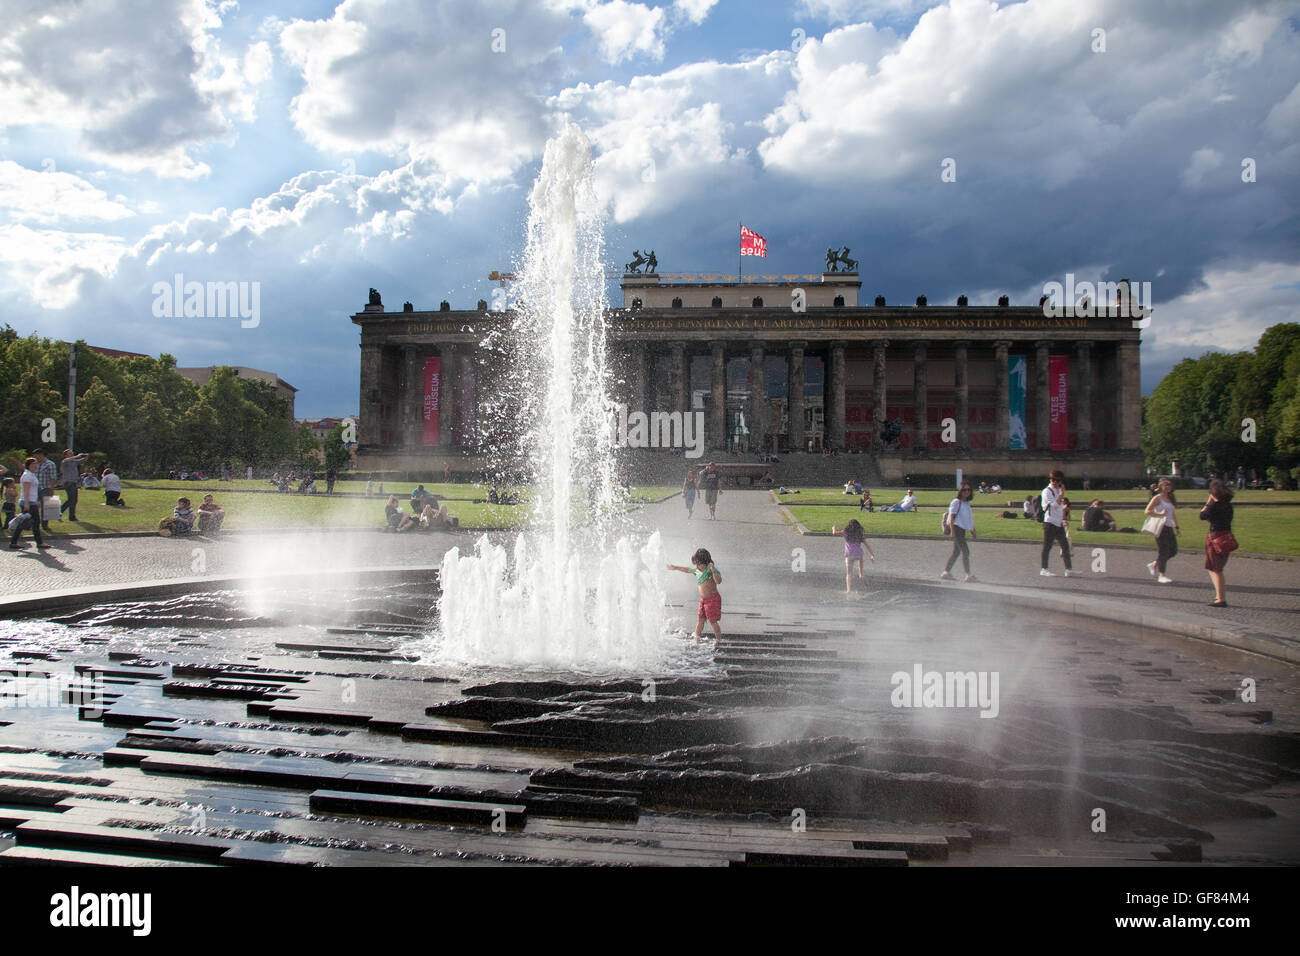 The Altes Museum on Museumsinsel or Museum Island in Berlin Germany, in the front you see a large fountain. Stock Photo